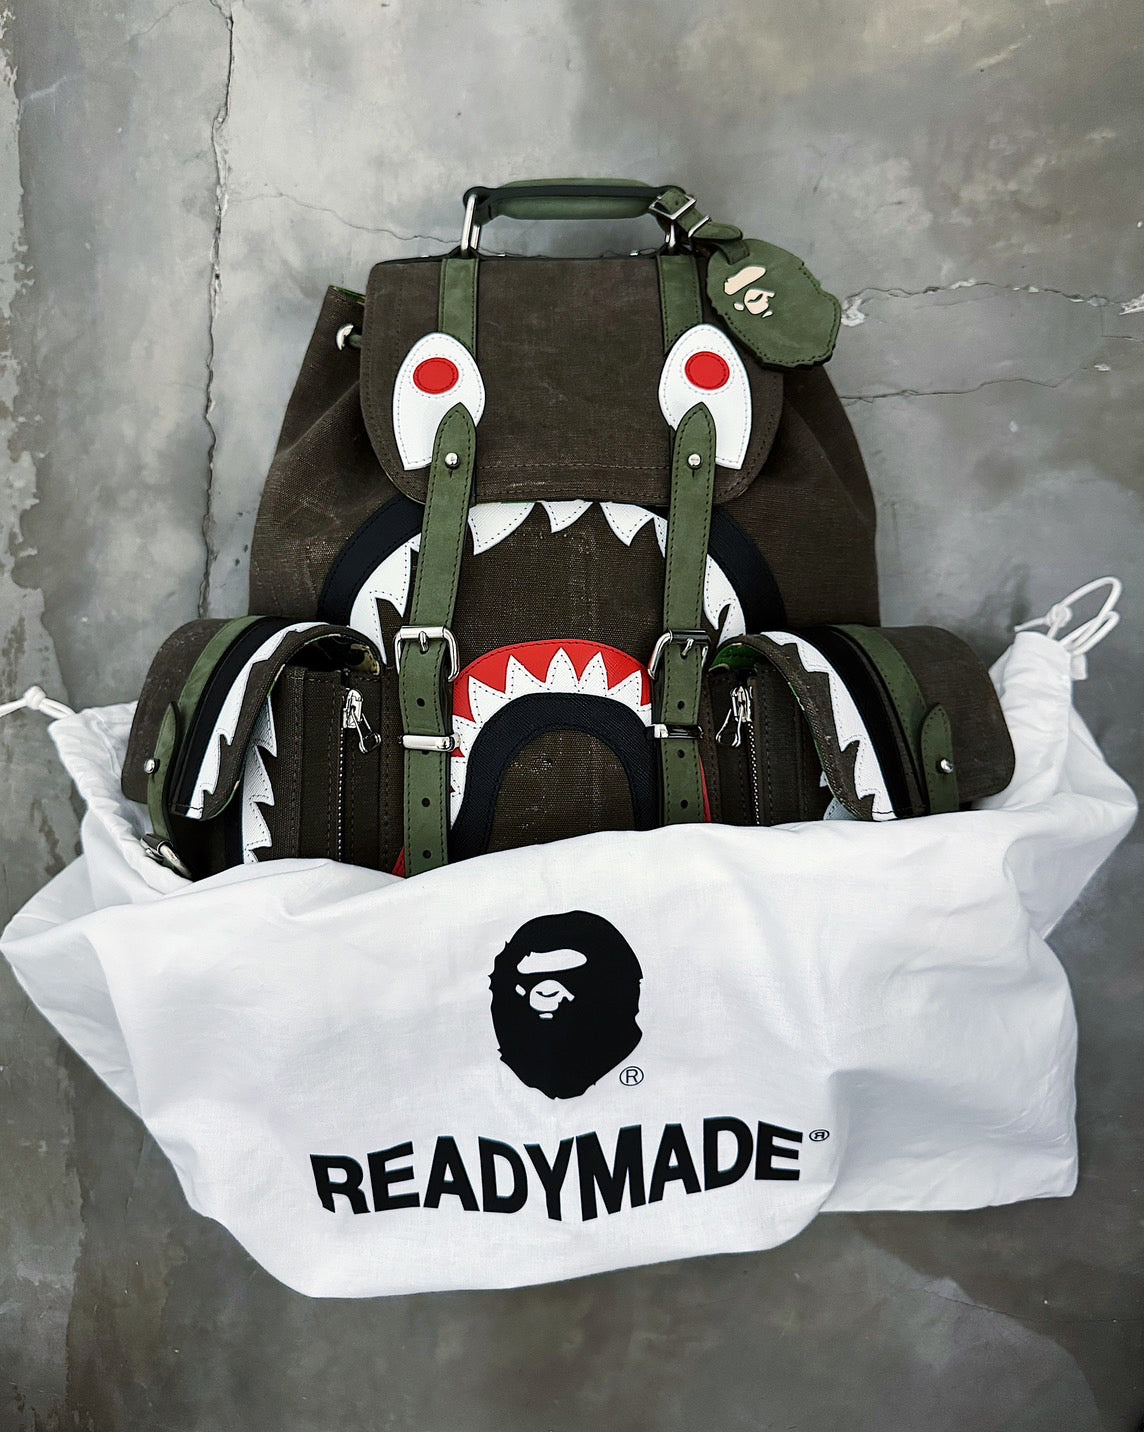 【READYMADE】<br> Collaboration items with "A BATHING APE®" which is celebrating its 30th anniversary, will be released on Saturday, March 30th!